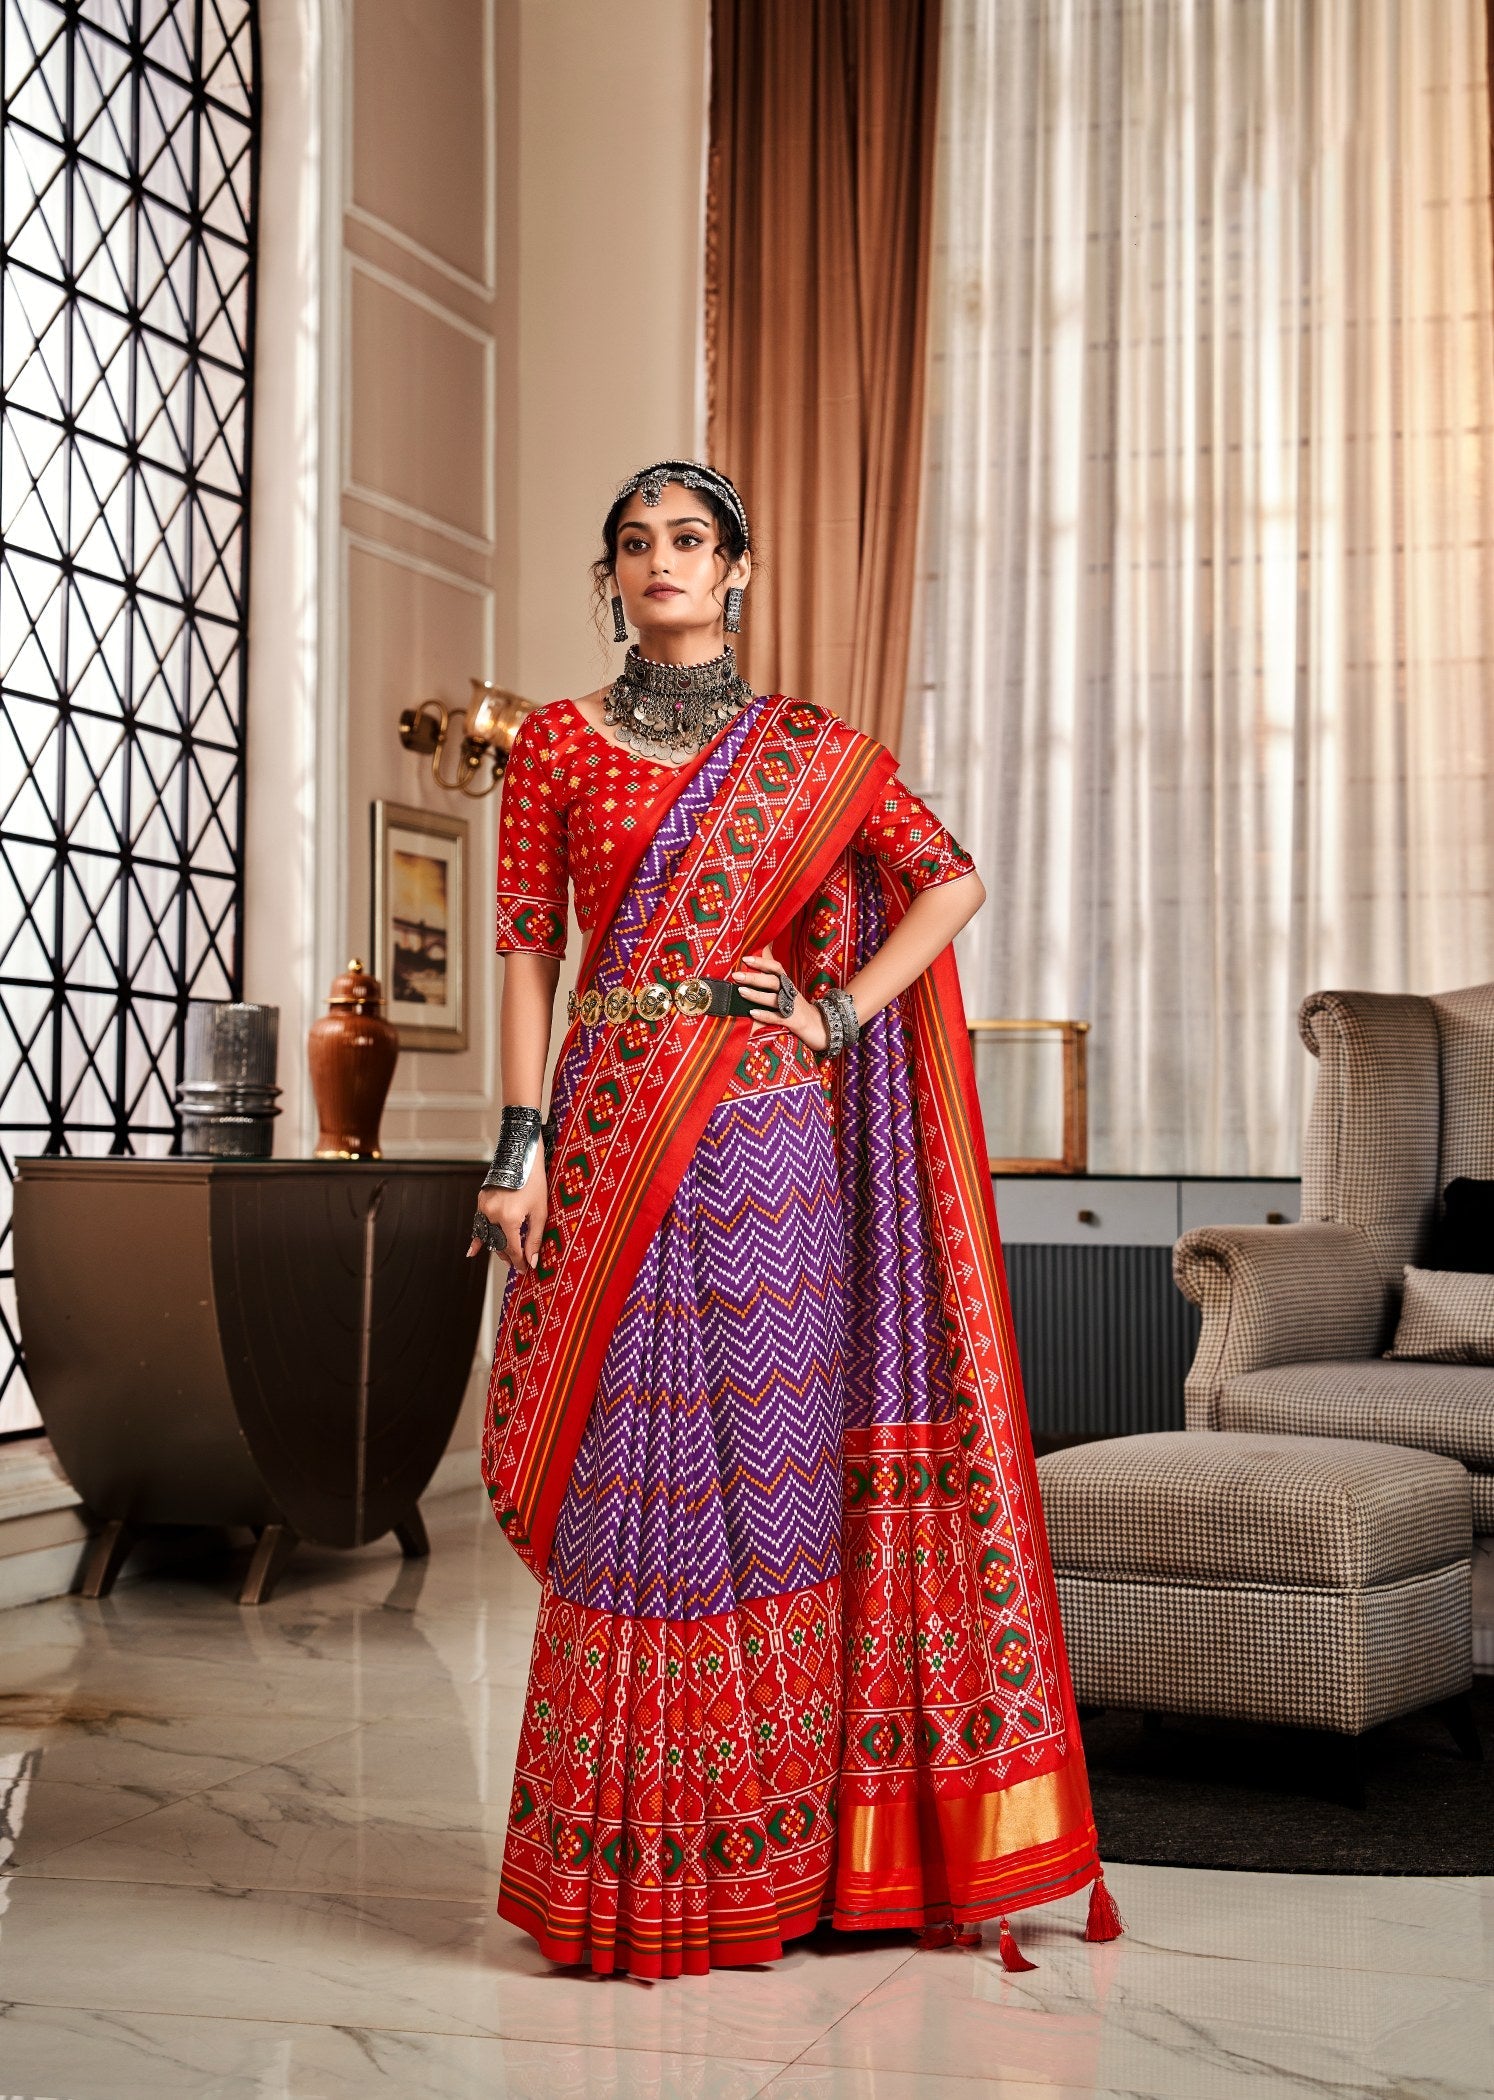 Exquisite RedPurple Pure Tusser Patola Saree with Patola Print for Party & Wedding Wear